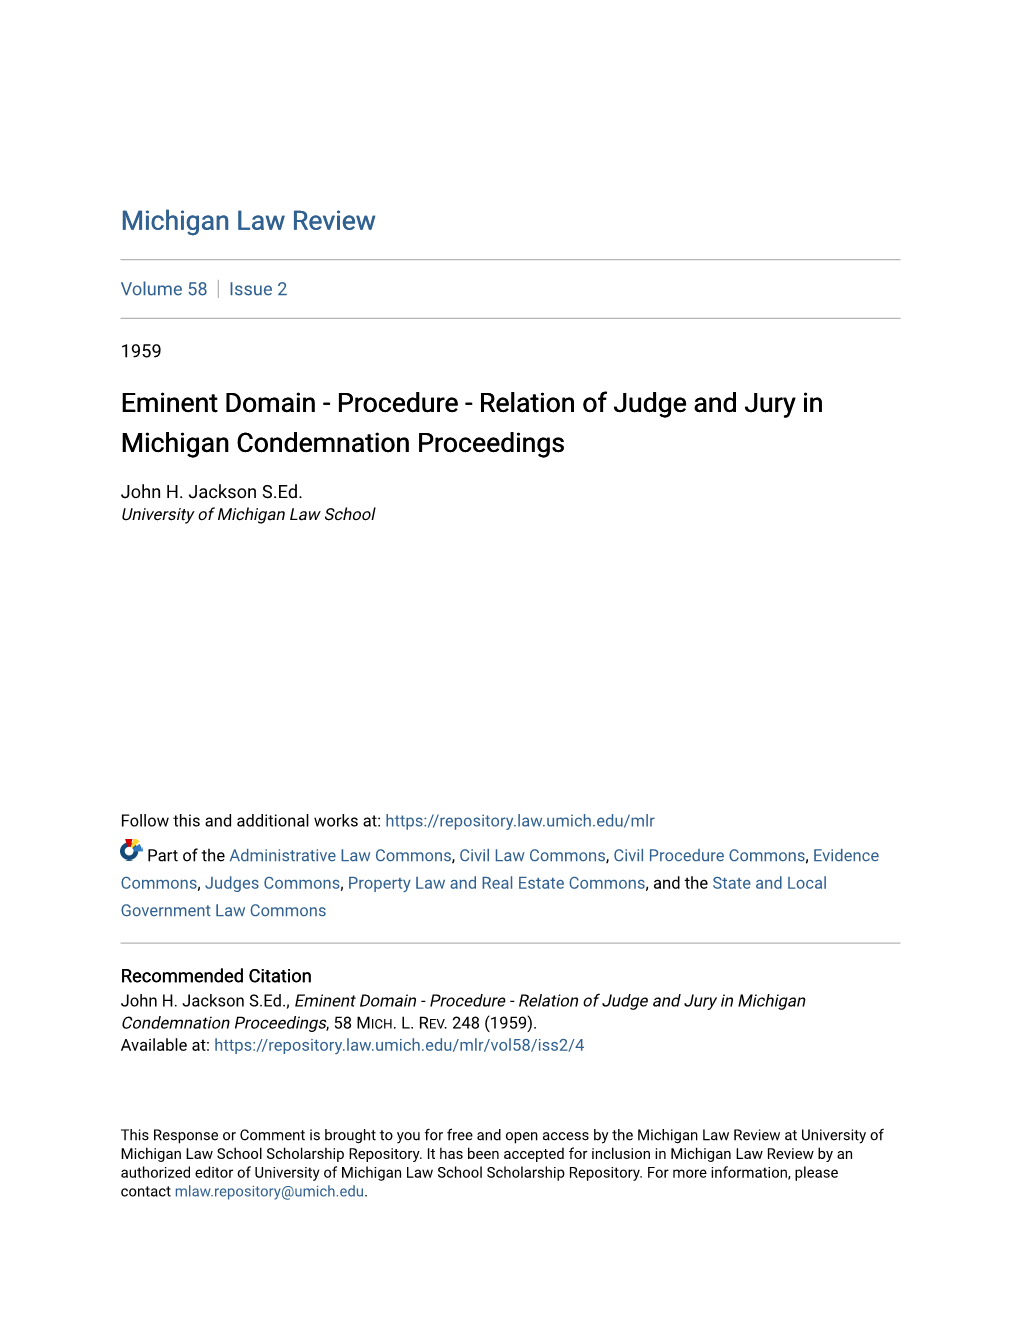 Eminent Domain - Procedure - Relation of Judge and Jury in Michigan Condemnation Proceedings